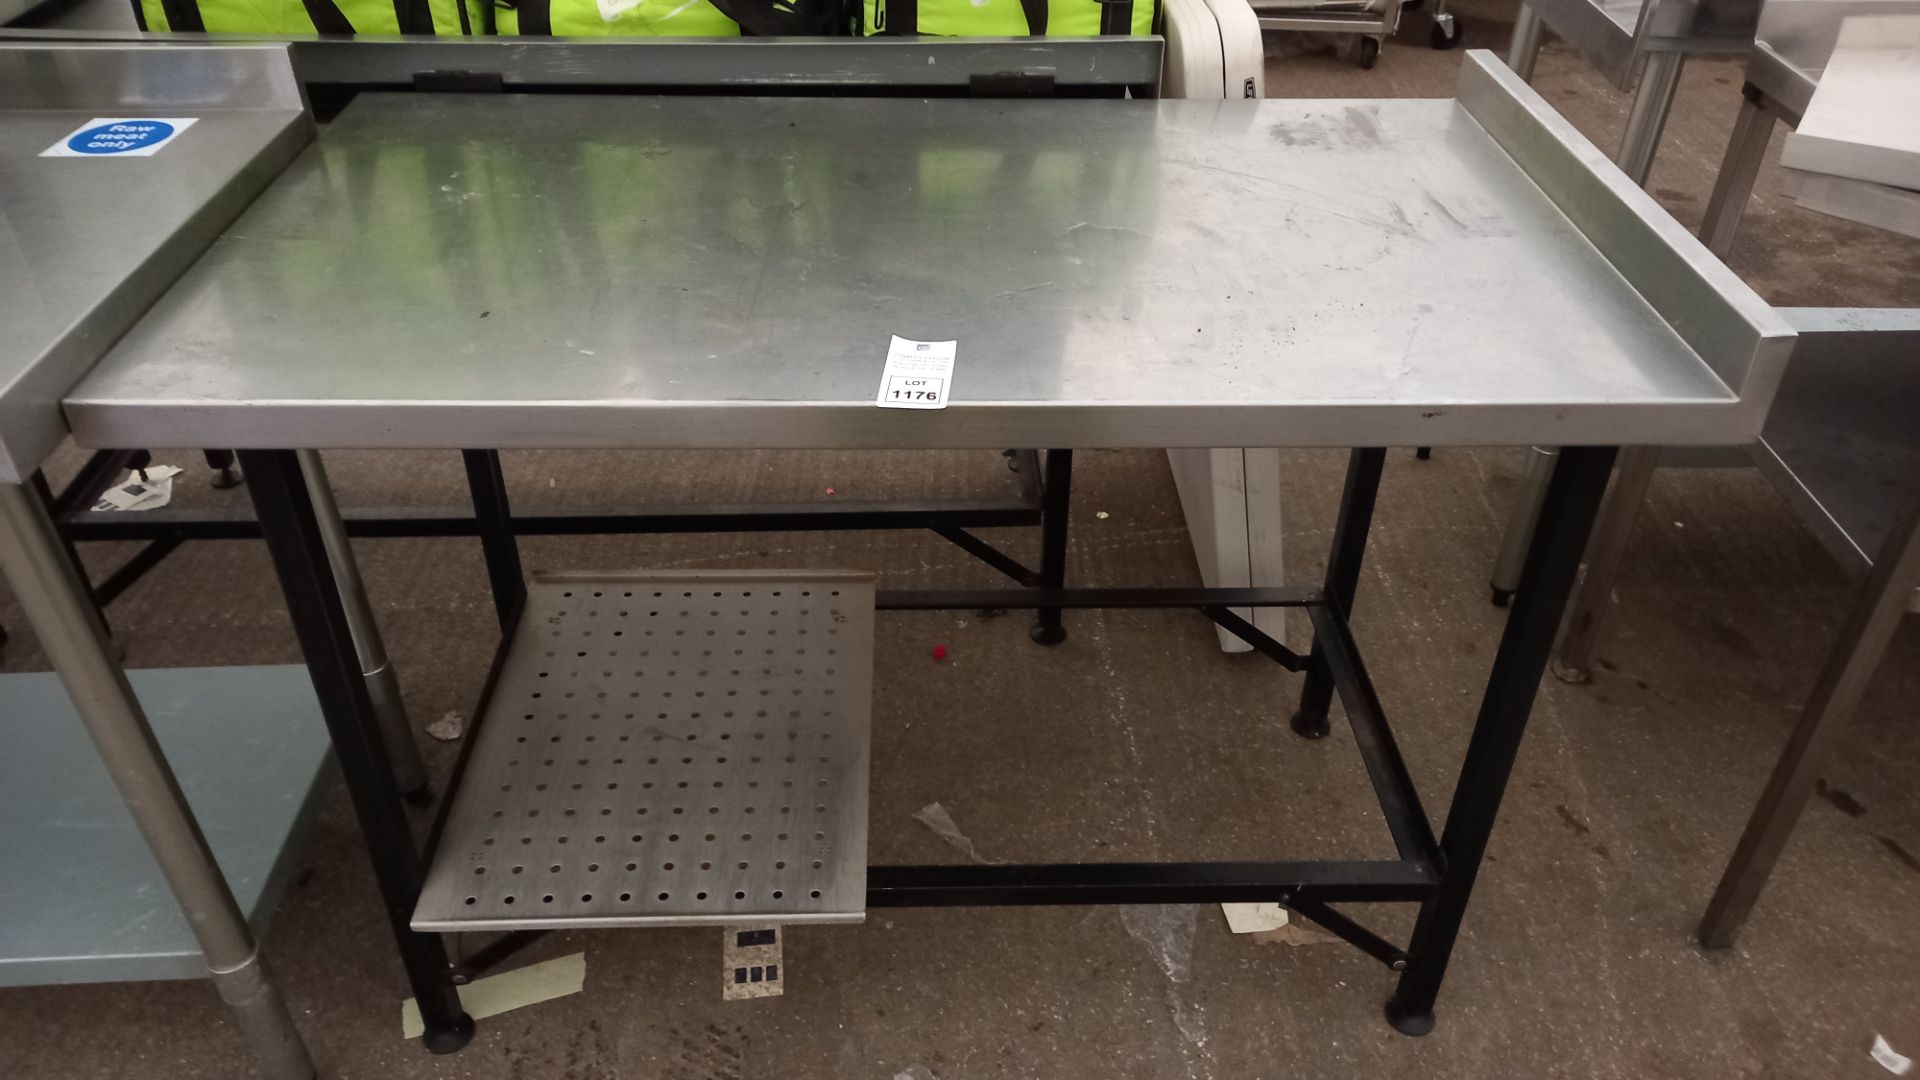 1 X STAINLESS STEEL PREP TABLE (67 X 120CM)